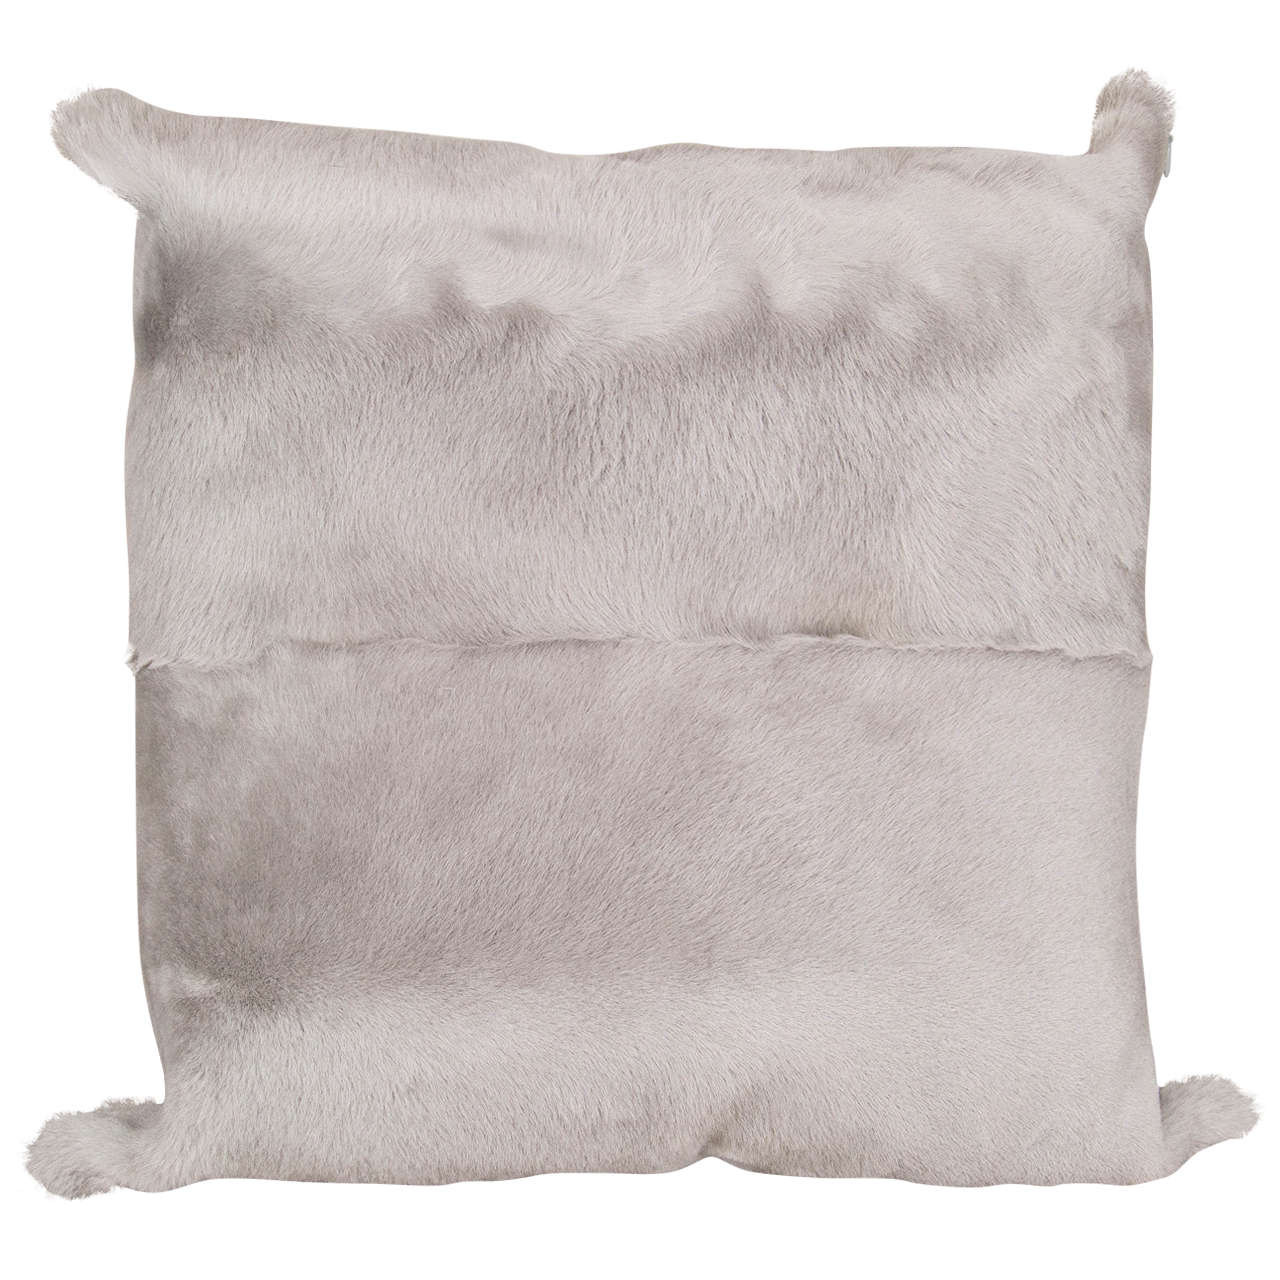 Custom Grey Sheared Goat Pillow with Leather Backing